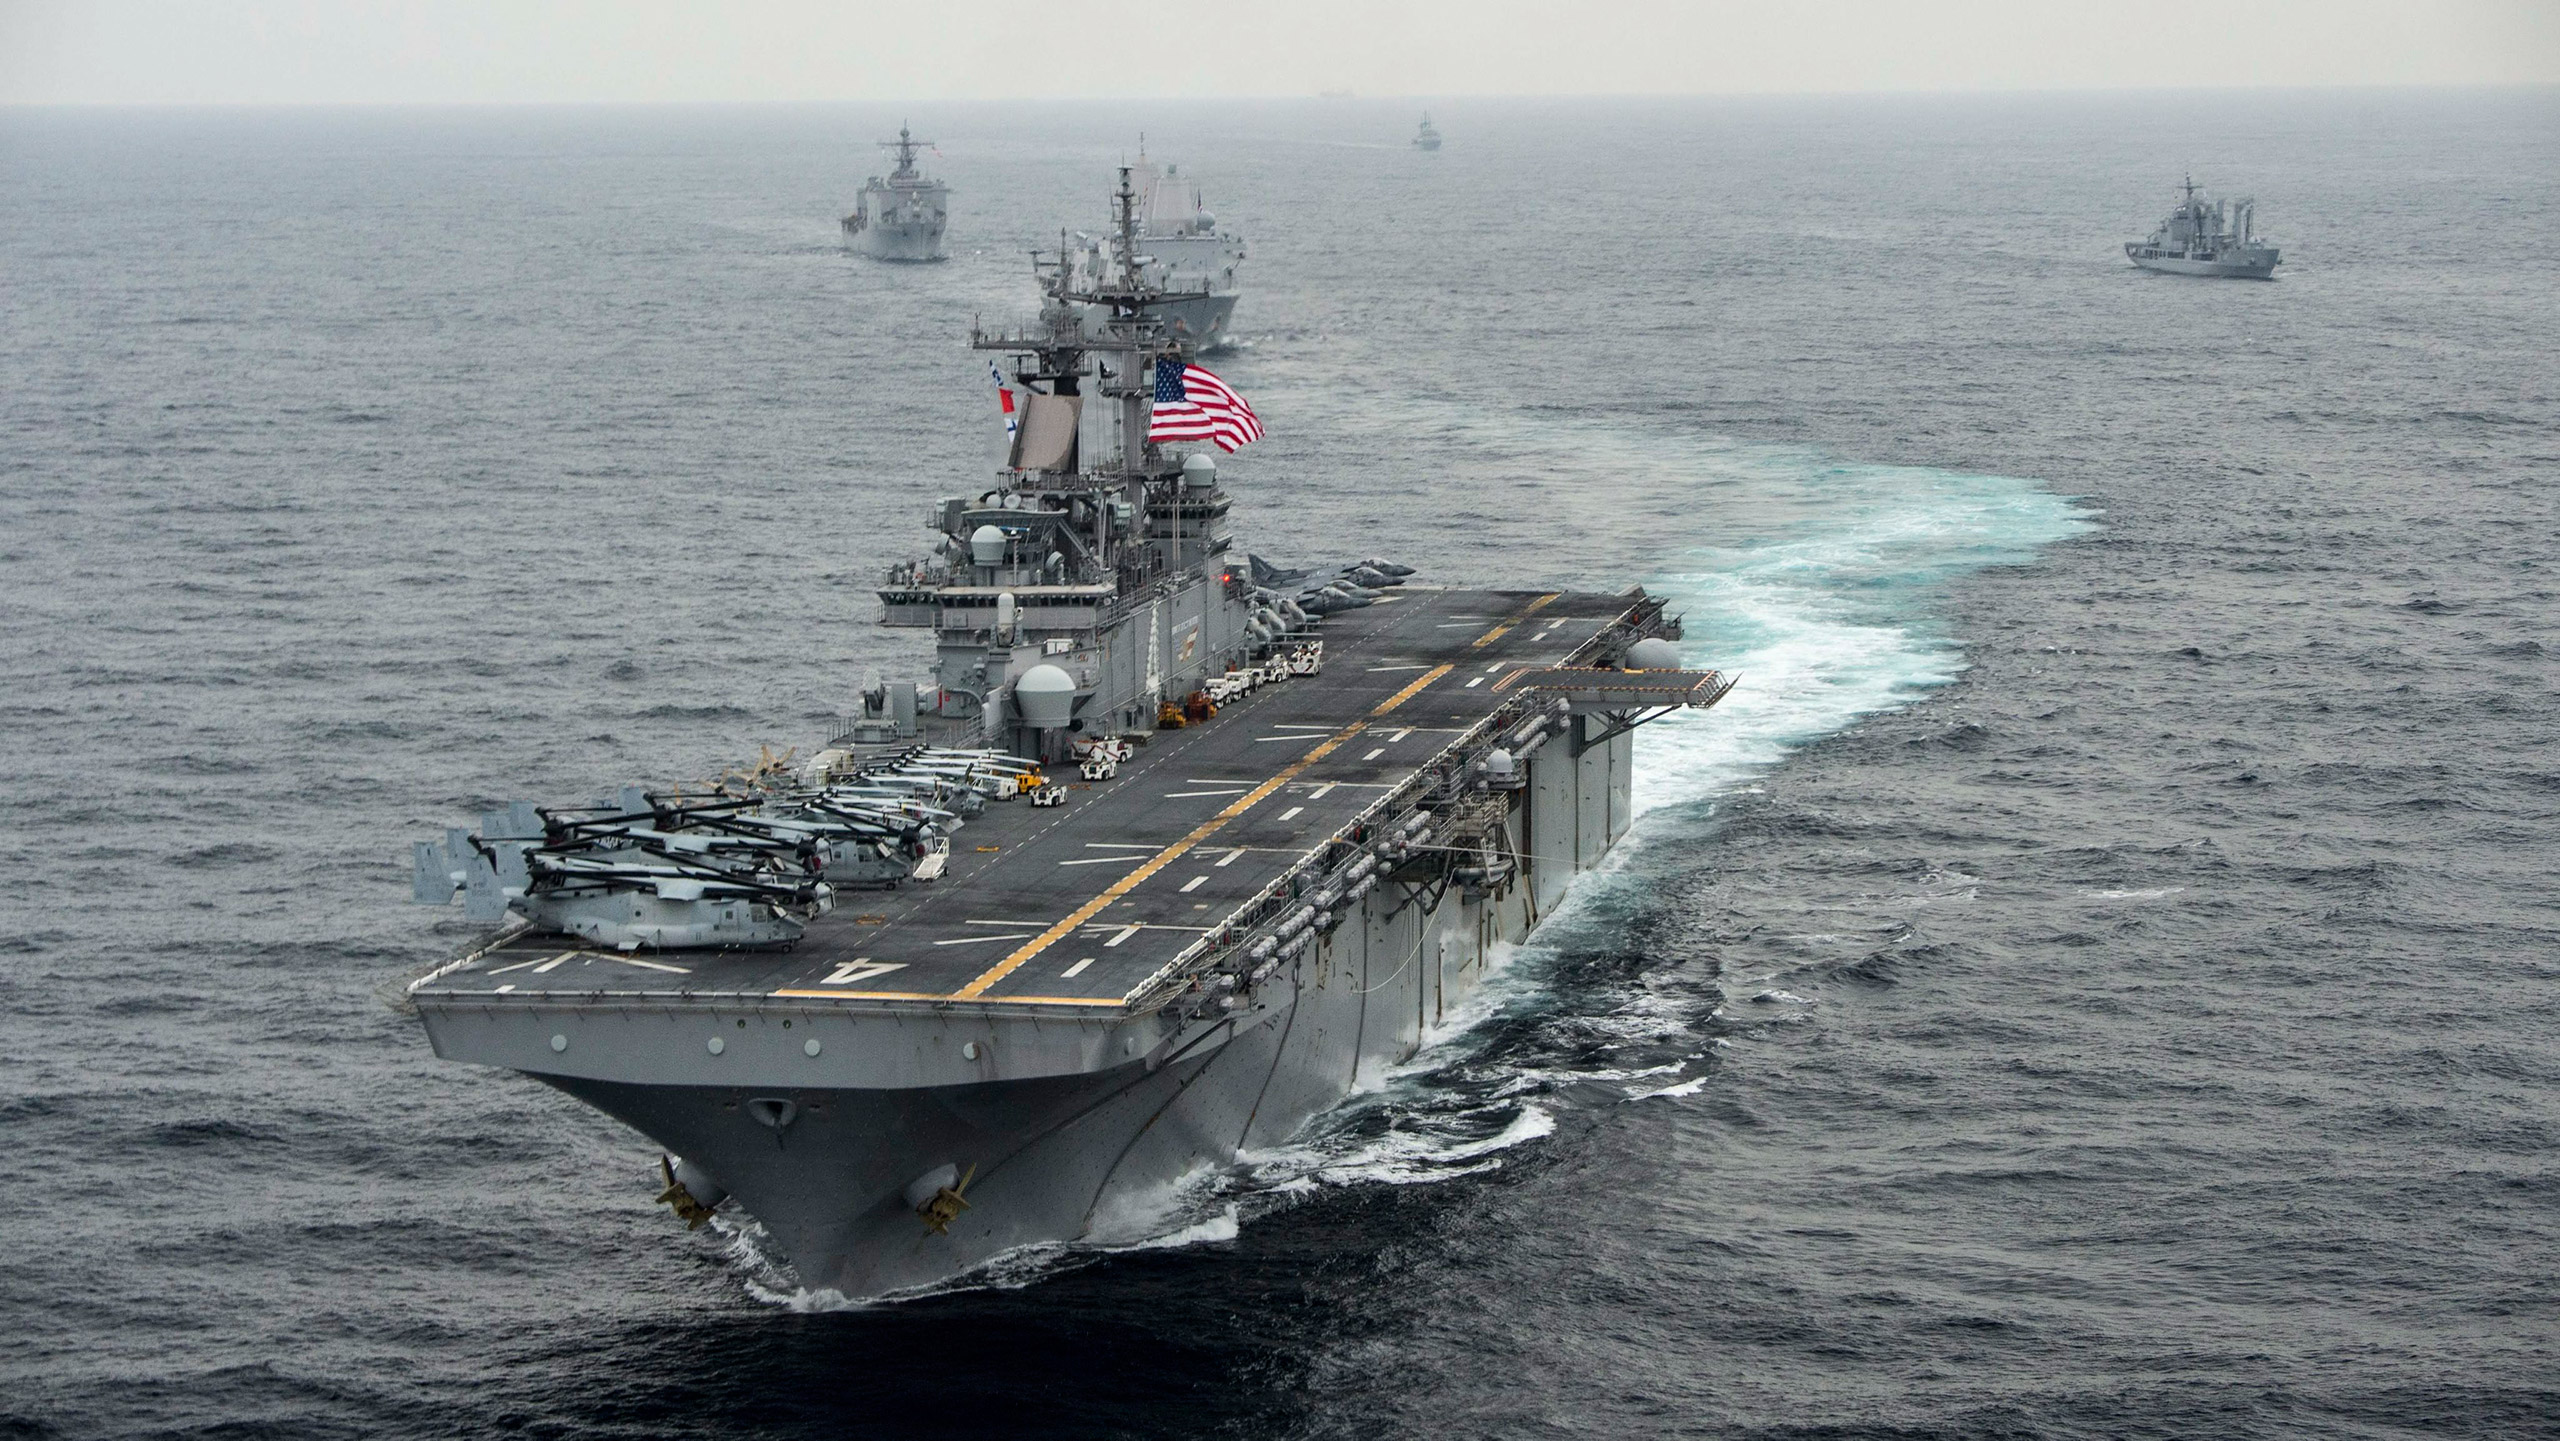 A handout photo provided by the U.S. Navy Media Content Operations on March 9, 2016, shows the amphibious assault ship USS Boxer (LHD 4) transiting the East Sea during Exercise Ssang Yong, in conjunction with the Republic of Korea Navy, one day earlier. (MCSN Craig Z. Rodarte—Handout/EPA)